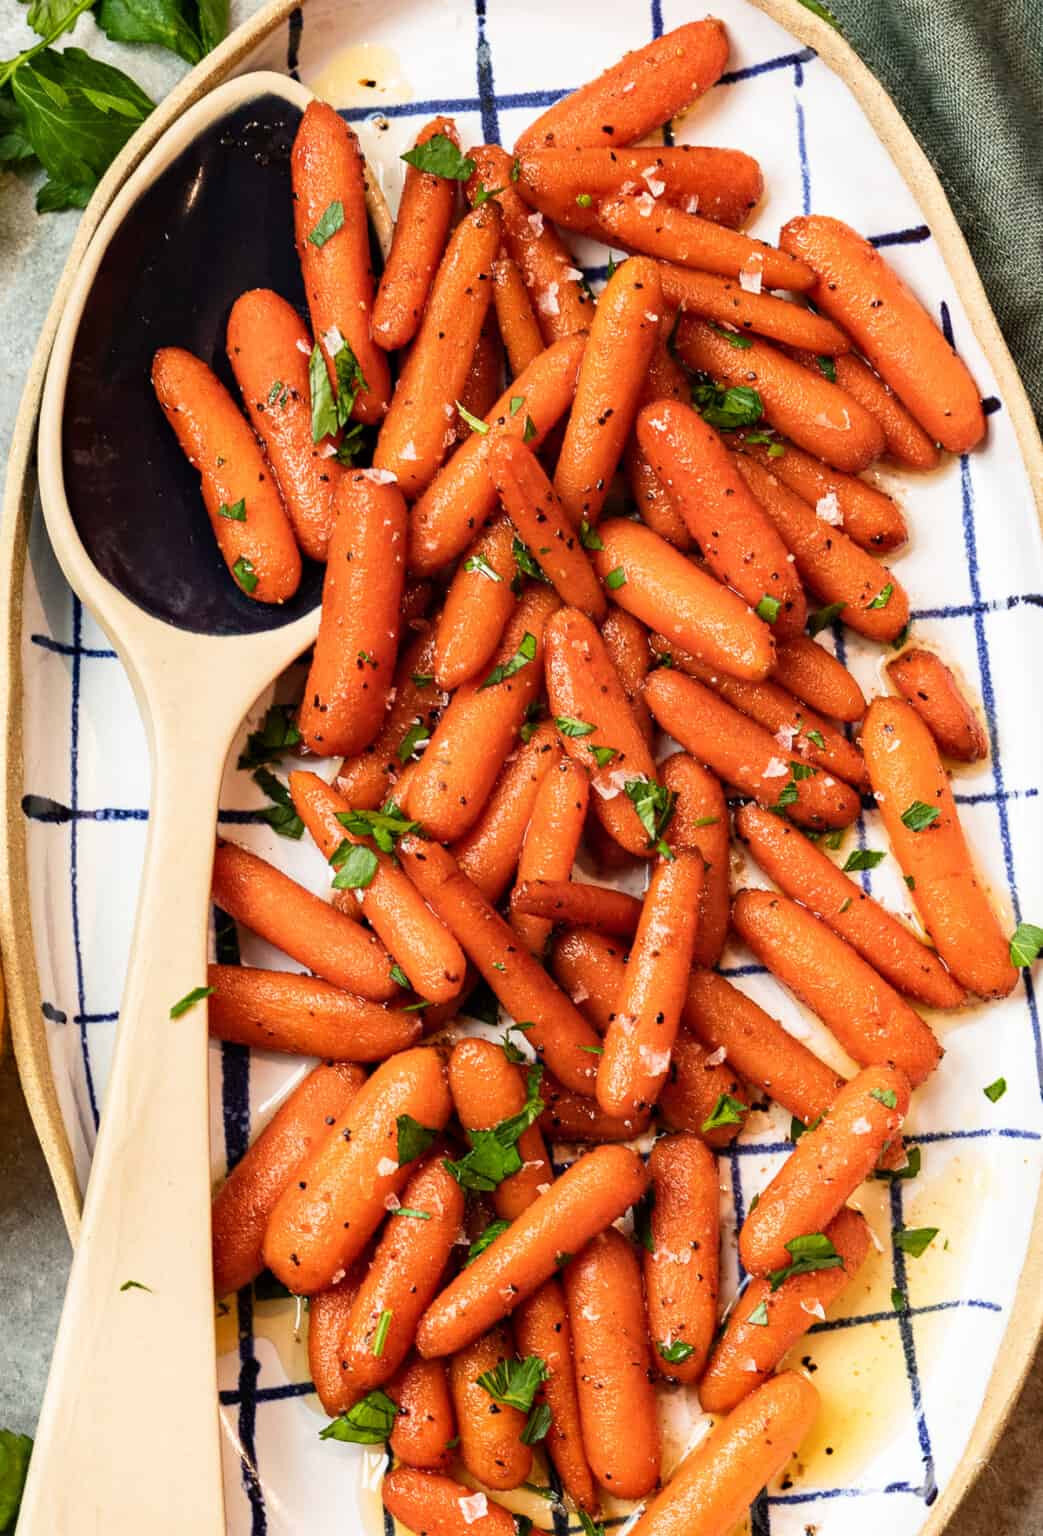 Red Wine Glazed Carrots Recipe - The Cookie Rookie®